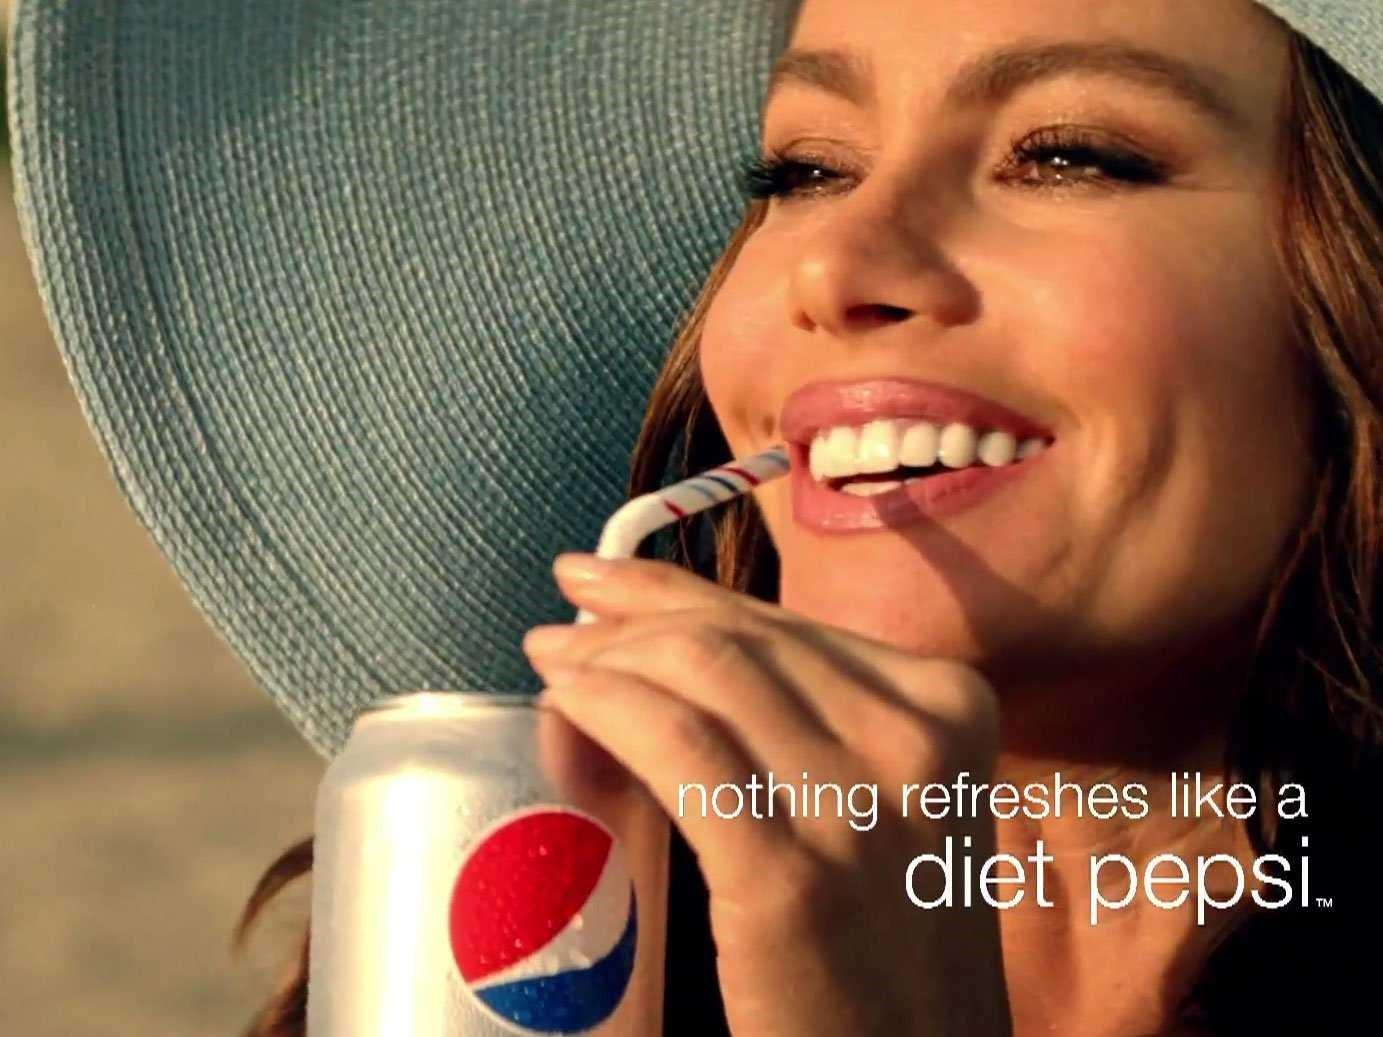 Nothing refreshes like a Diet Pepsi